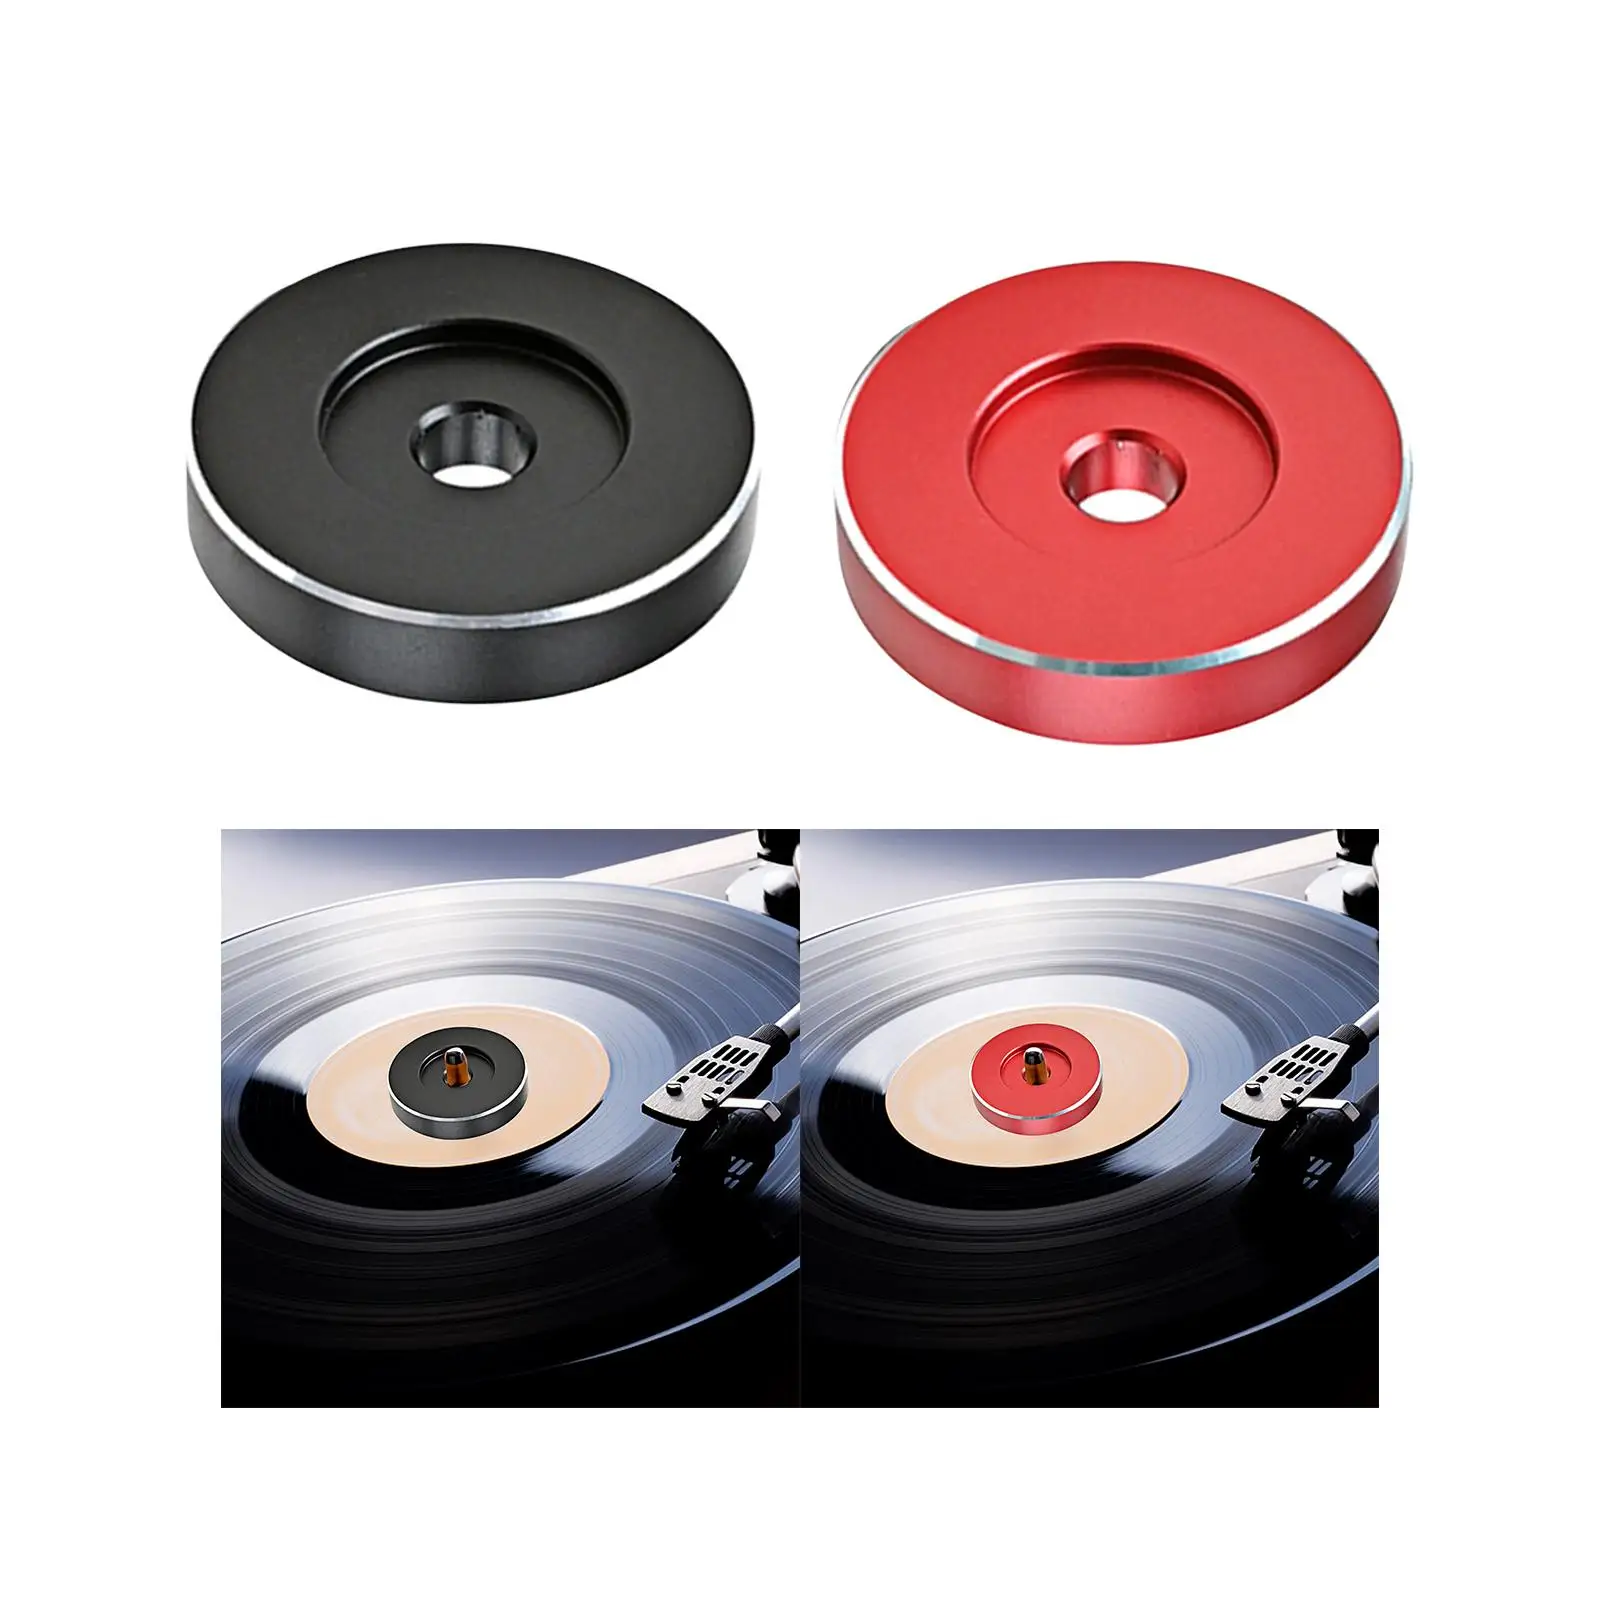 Retro Middle Adaptor Home Vinyl Records Adapter for Home Audio Parts